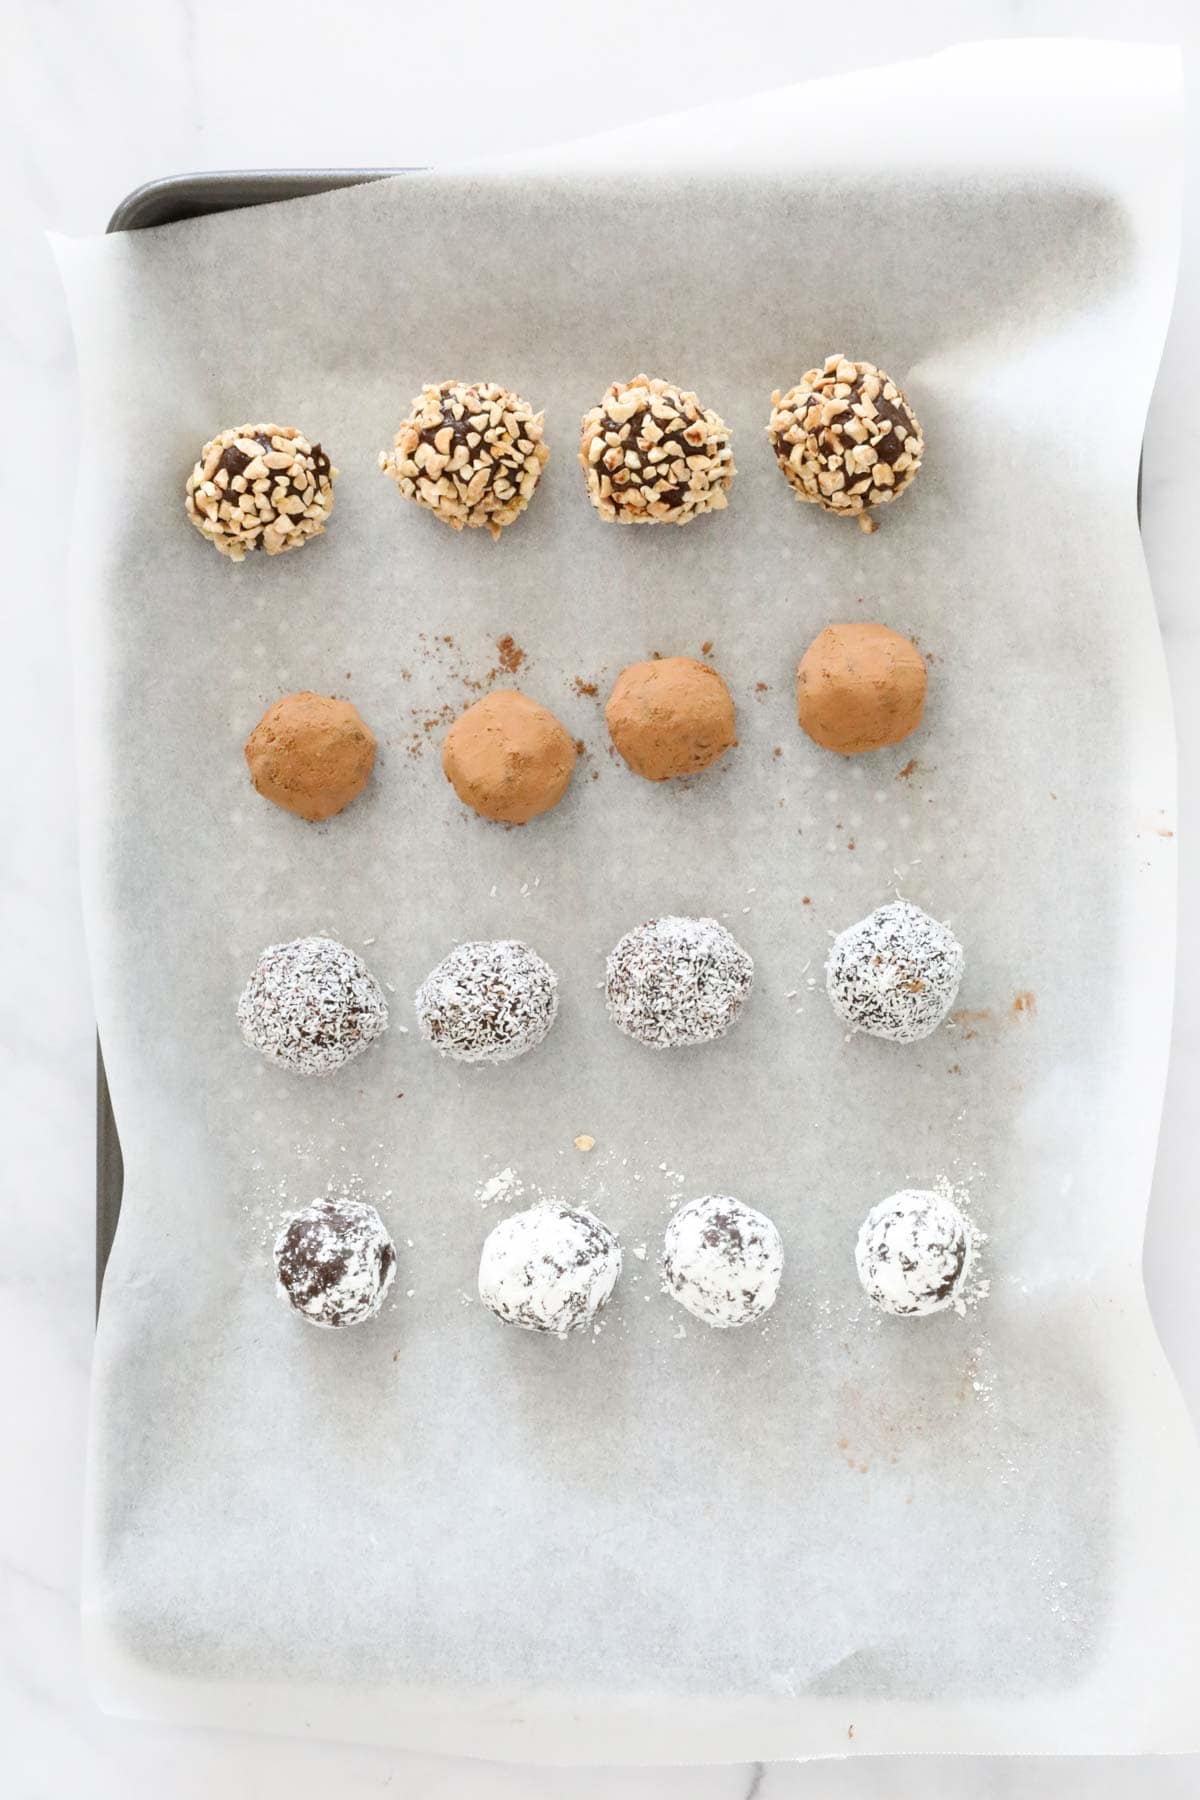 Four different varieties of coated truffles on a baking paper lined tray.